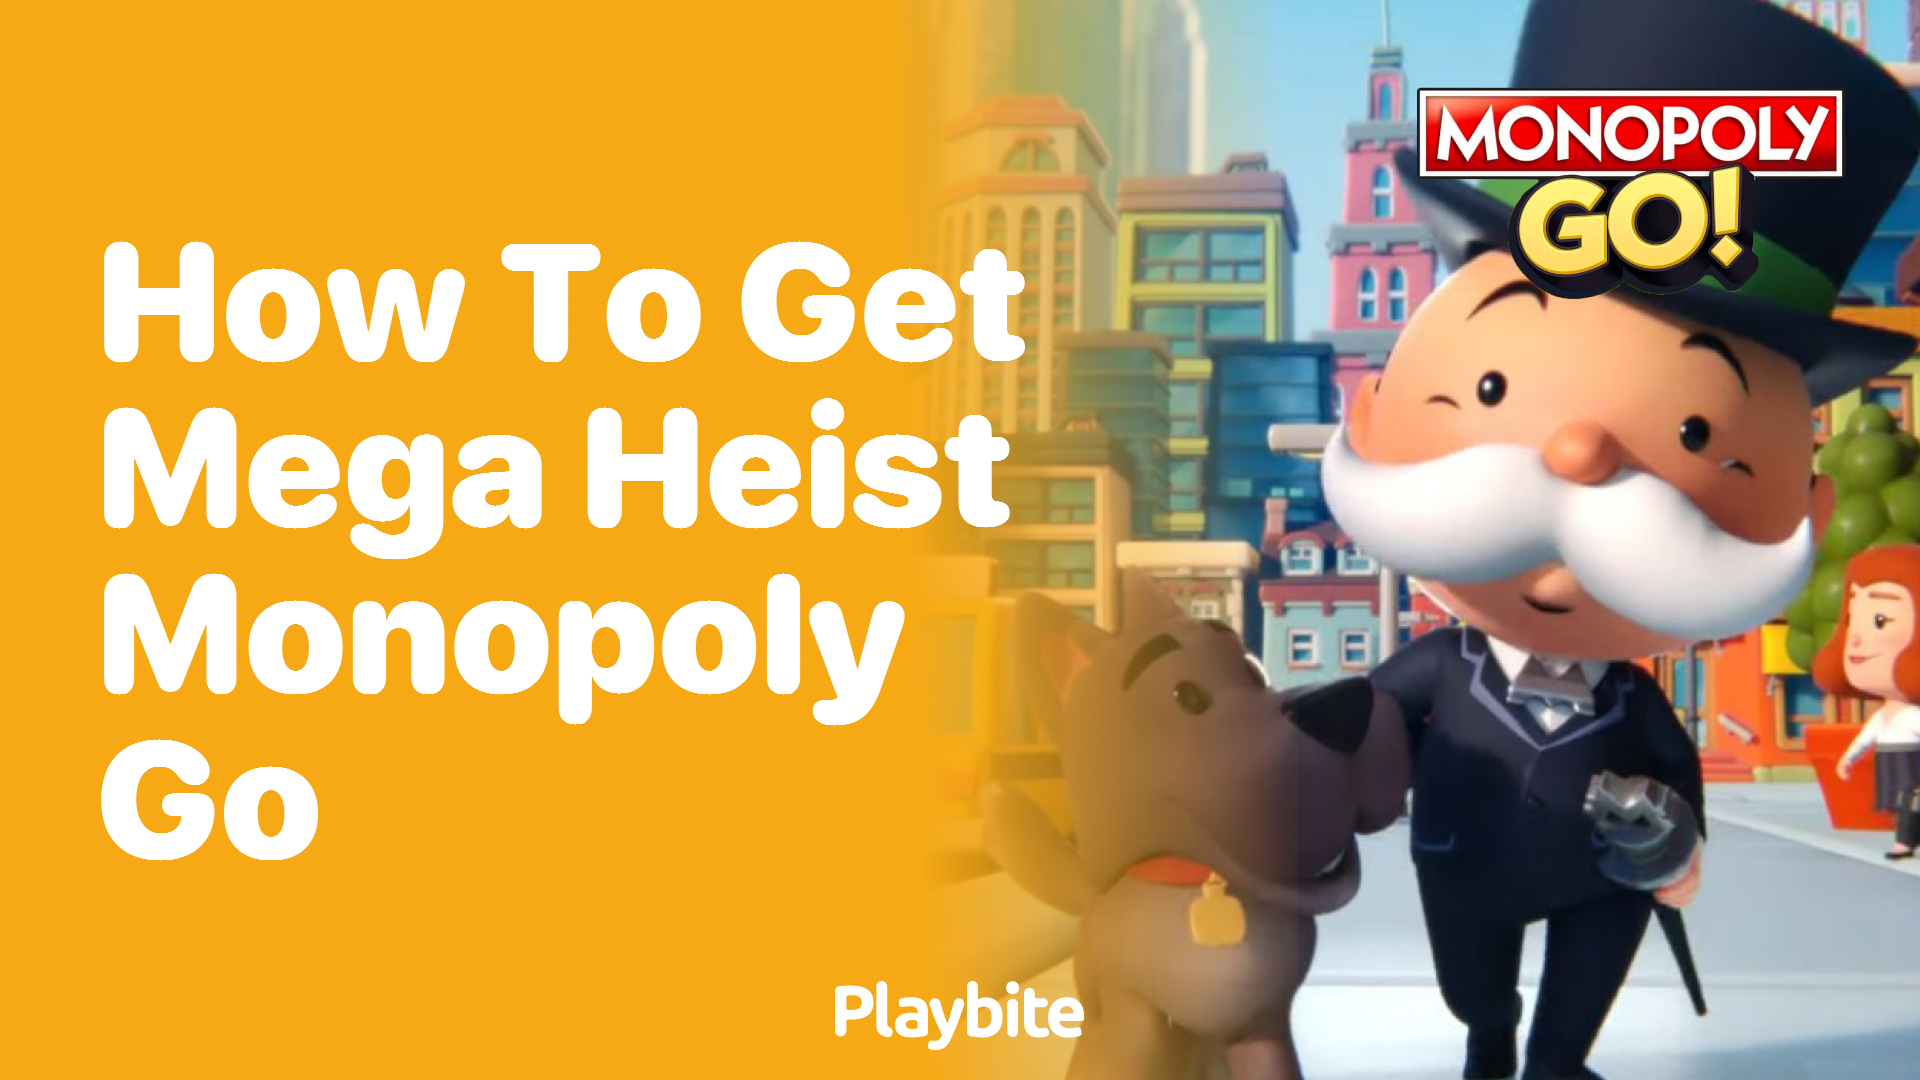 How to Get Mega Heist in Monopoly Go